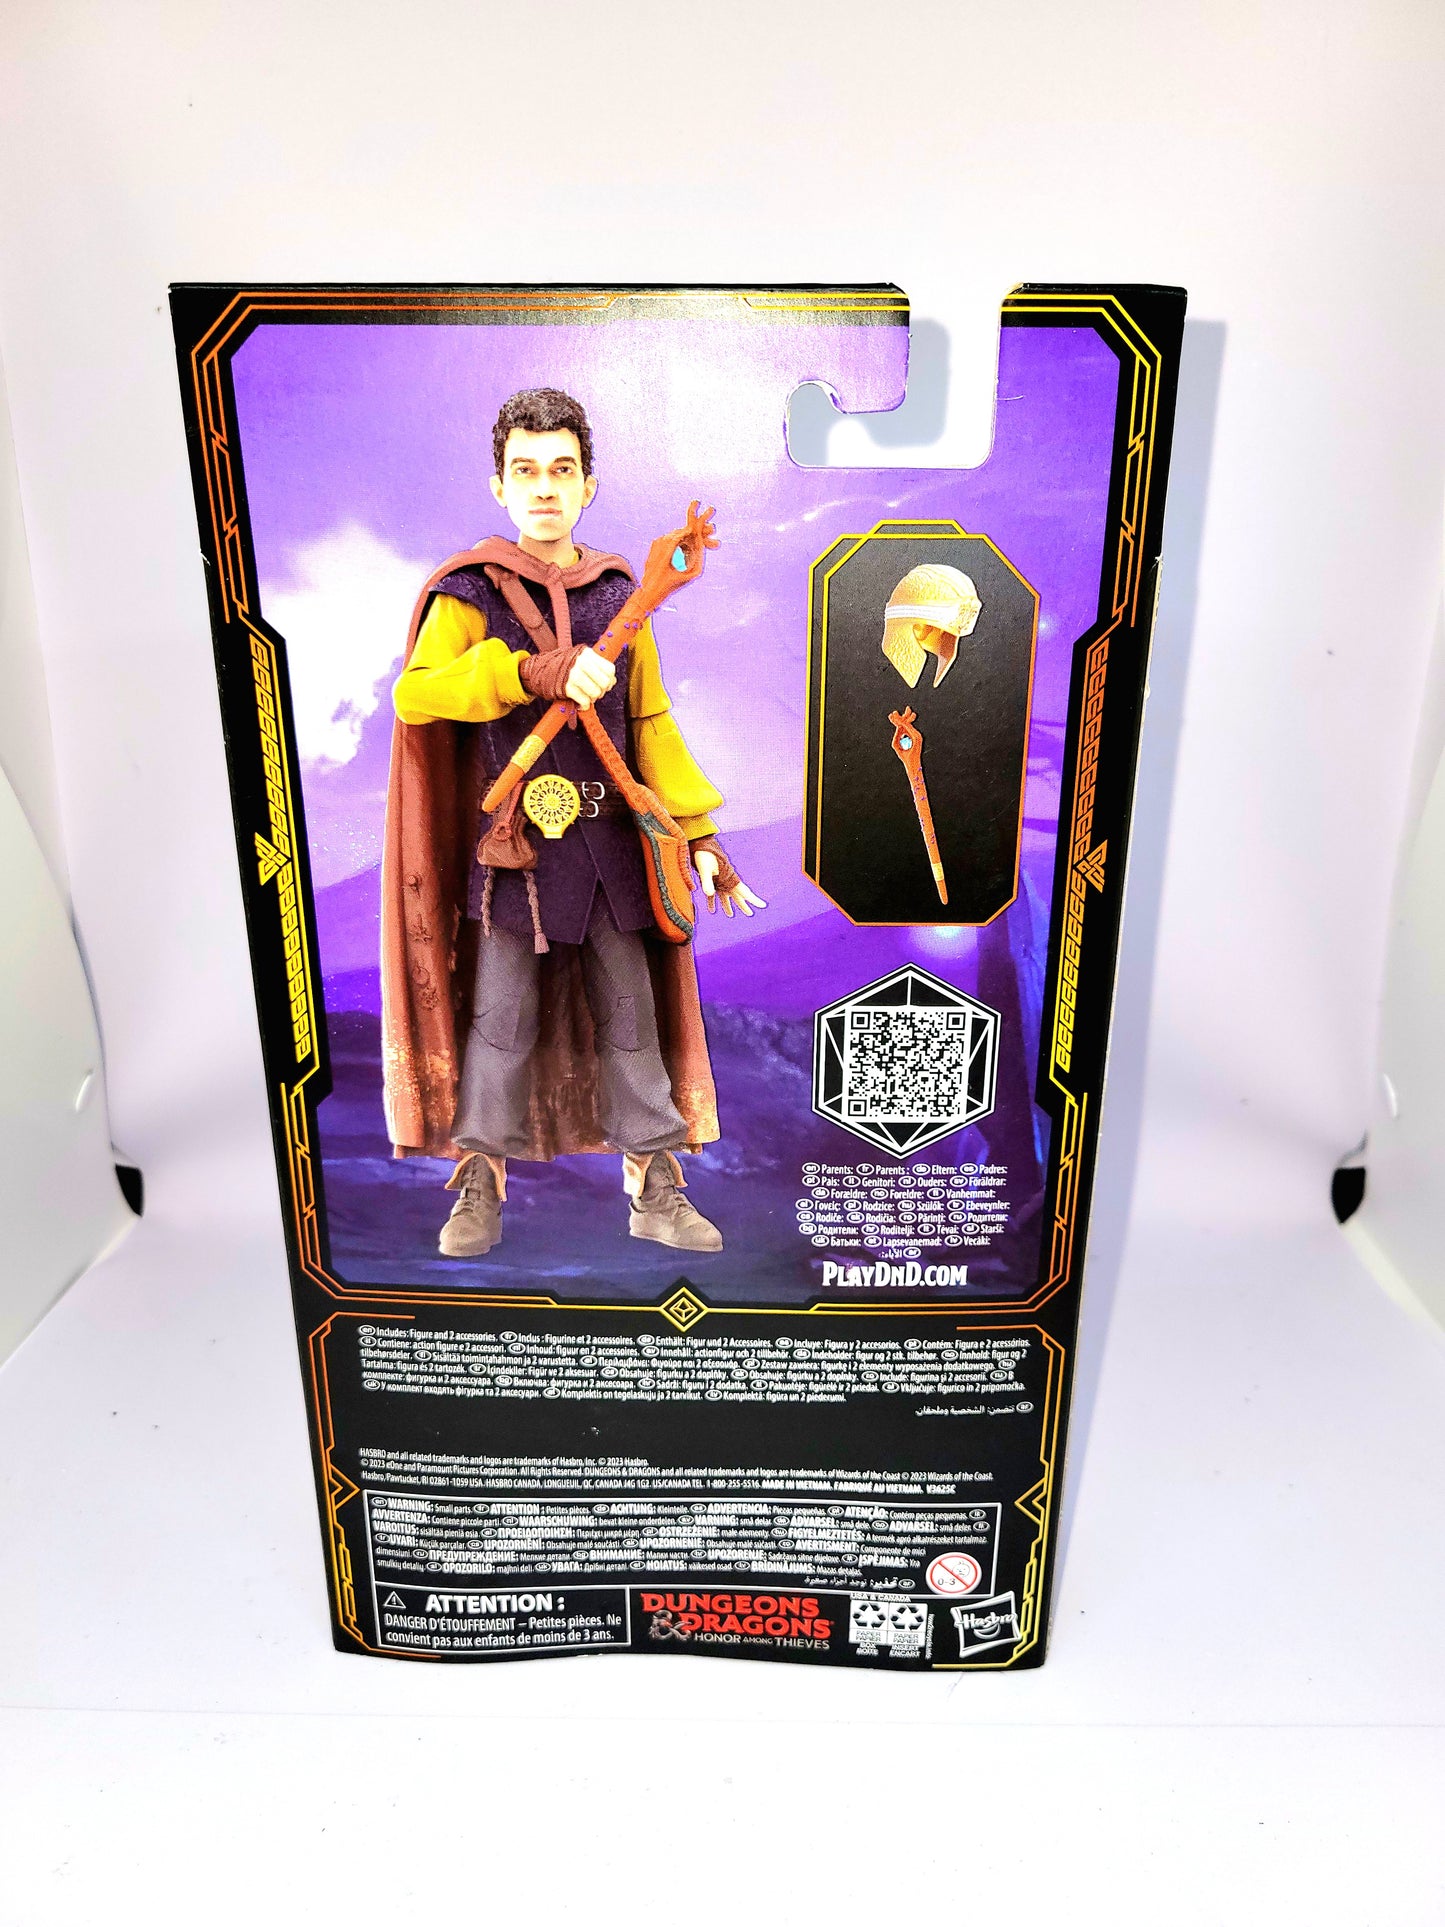 Hasbro Dungeons & Dragons Honor Among Thieves Golden Archive Simon Action Figure